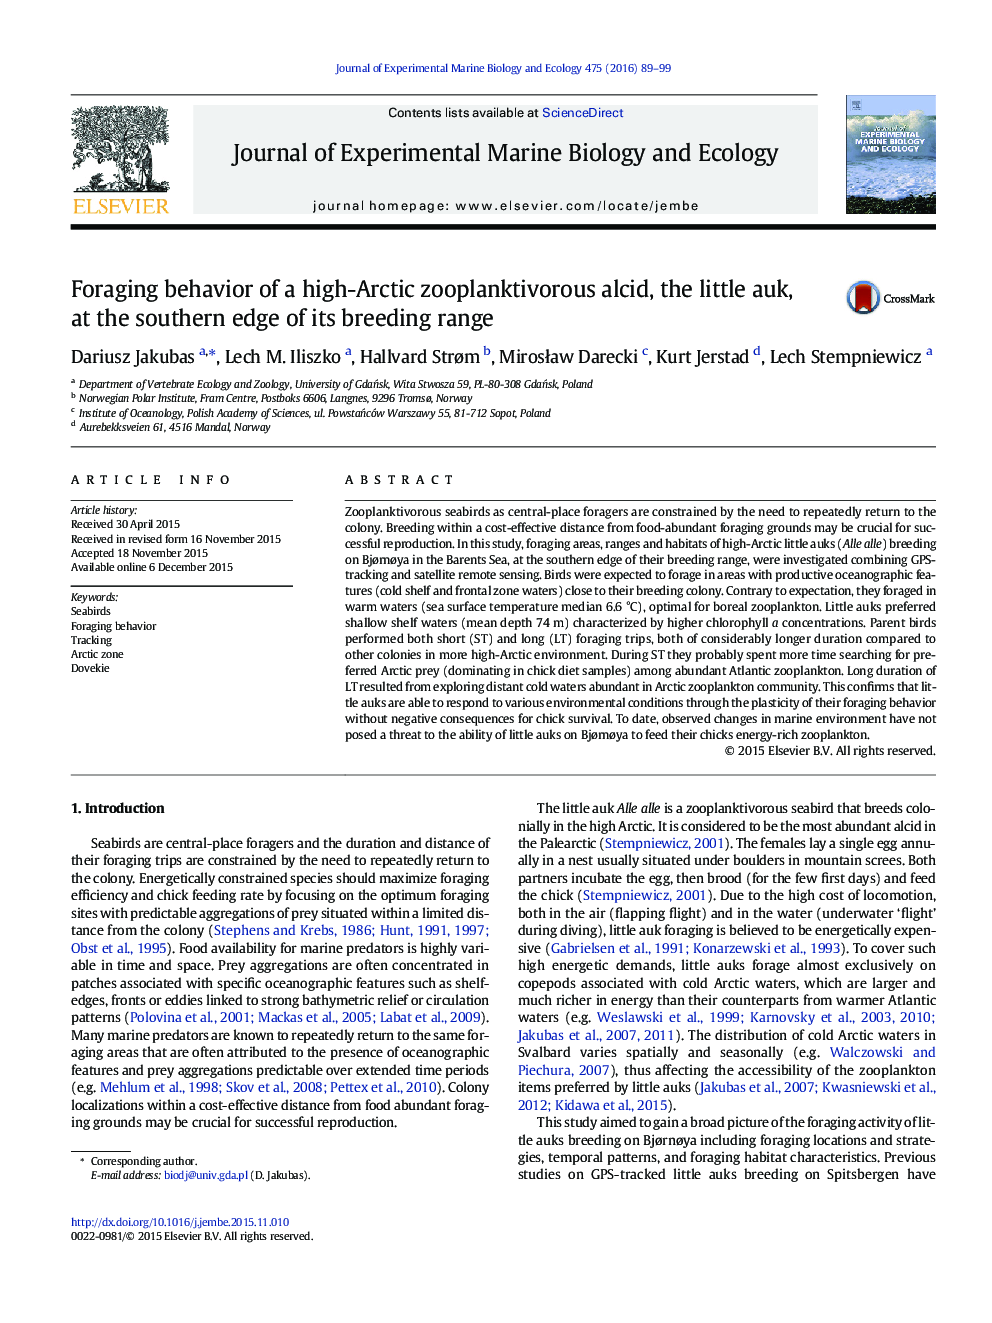 Foraging behavior of a high-Arctic zooplanktivorous alcid, the little auk, at the southern edge of its breeding range